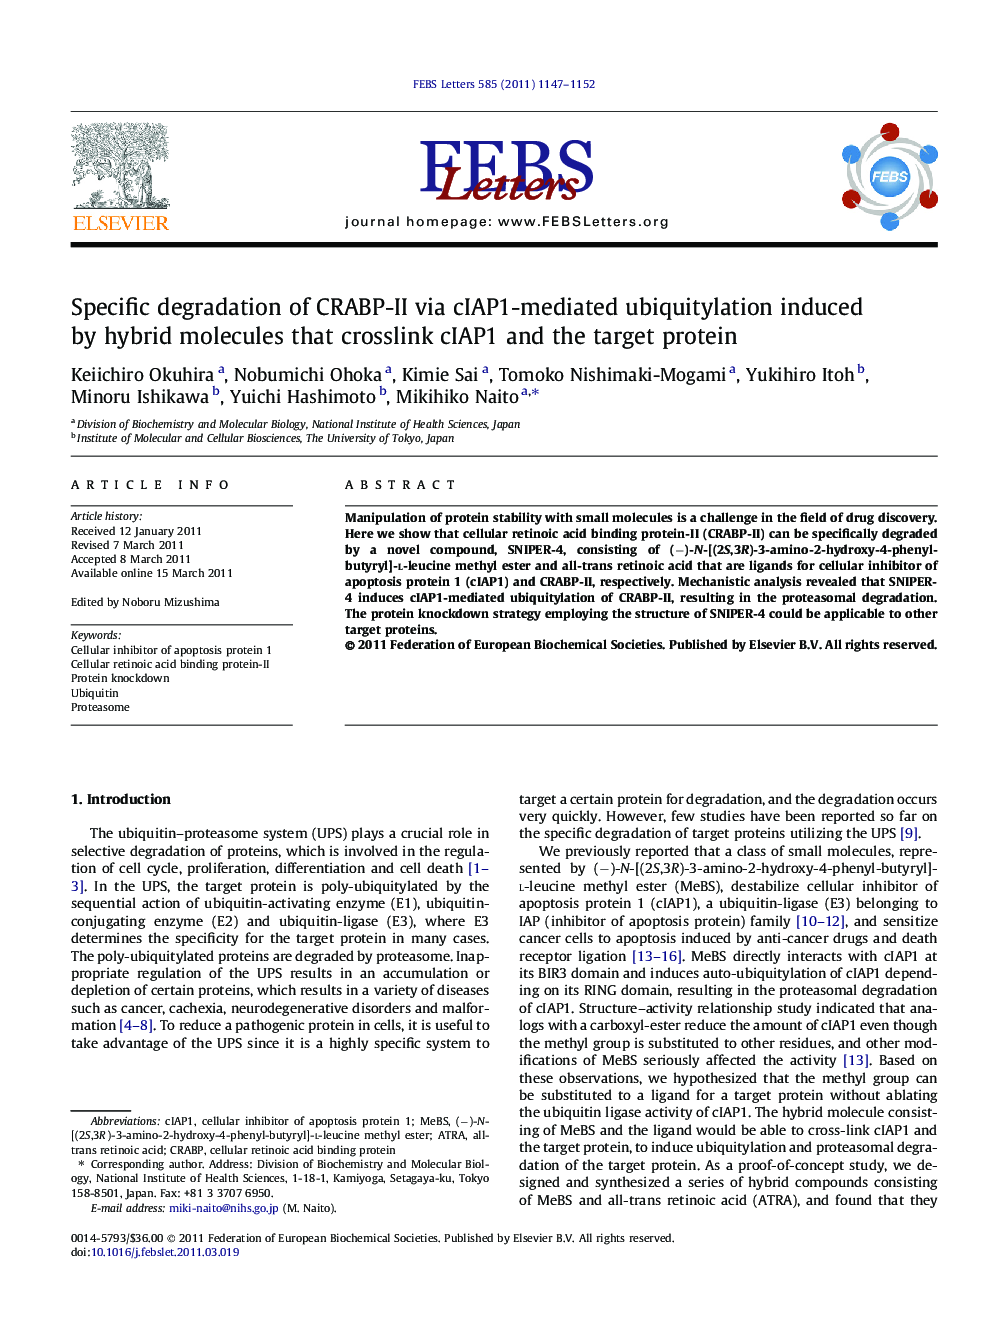 Specific degradation of CRABP-II via cIAP1-mediated ubiquitylation induced by hybrid molecules that crosslink cIAP1 and the target protein